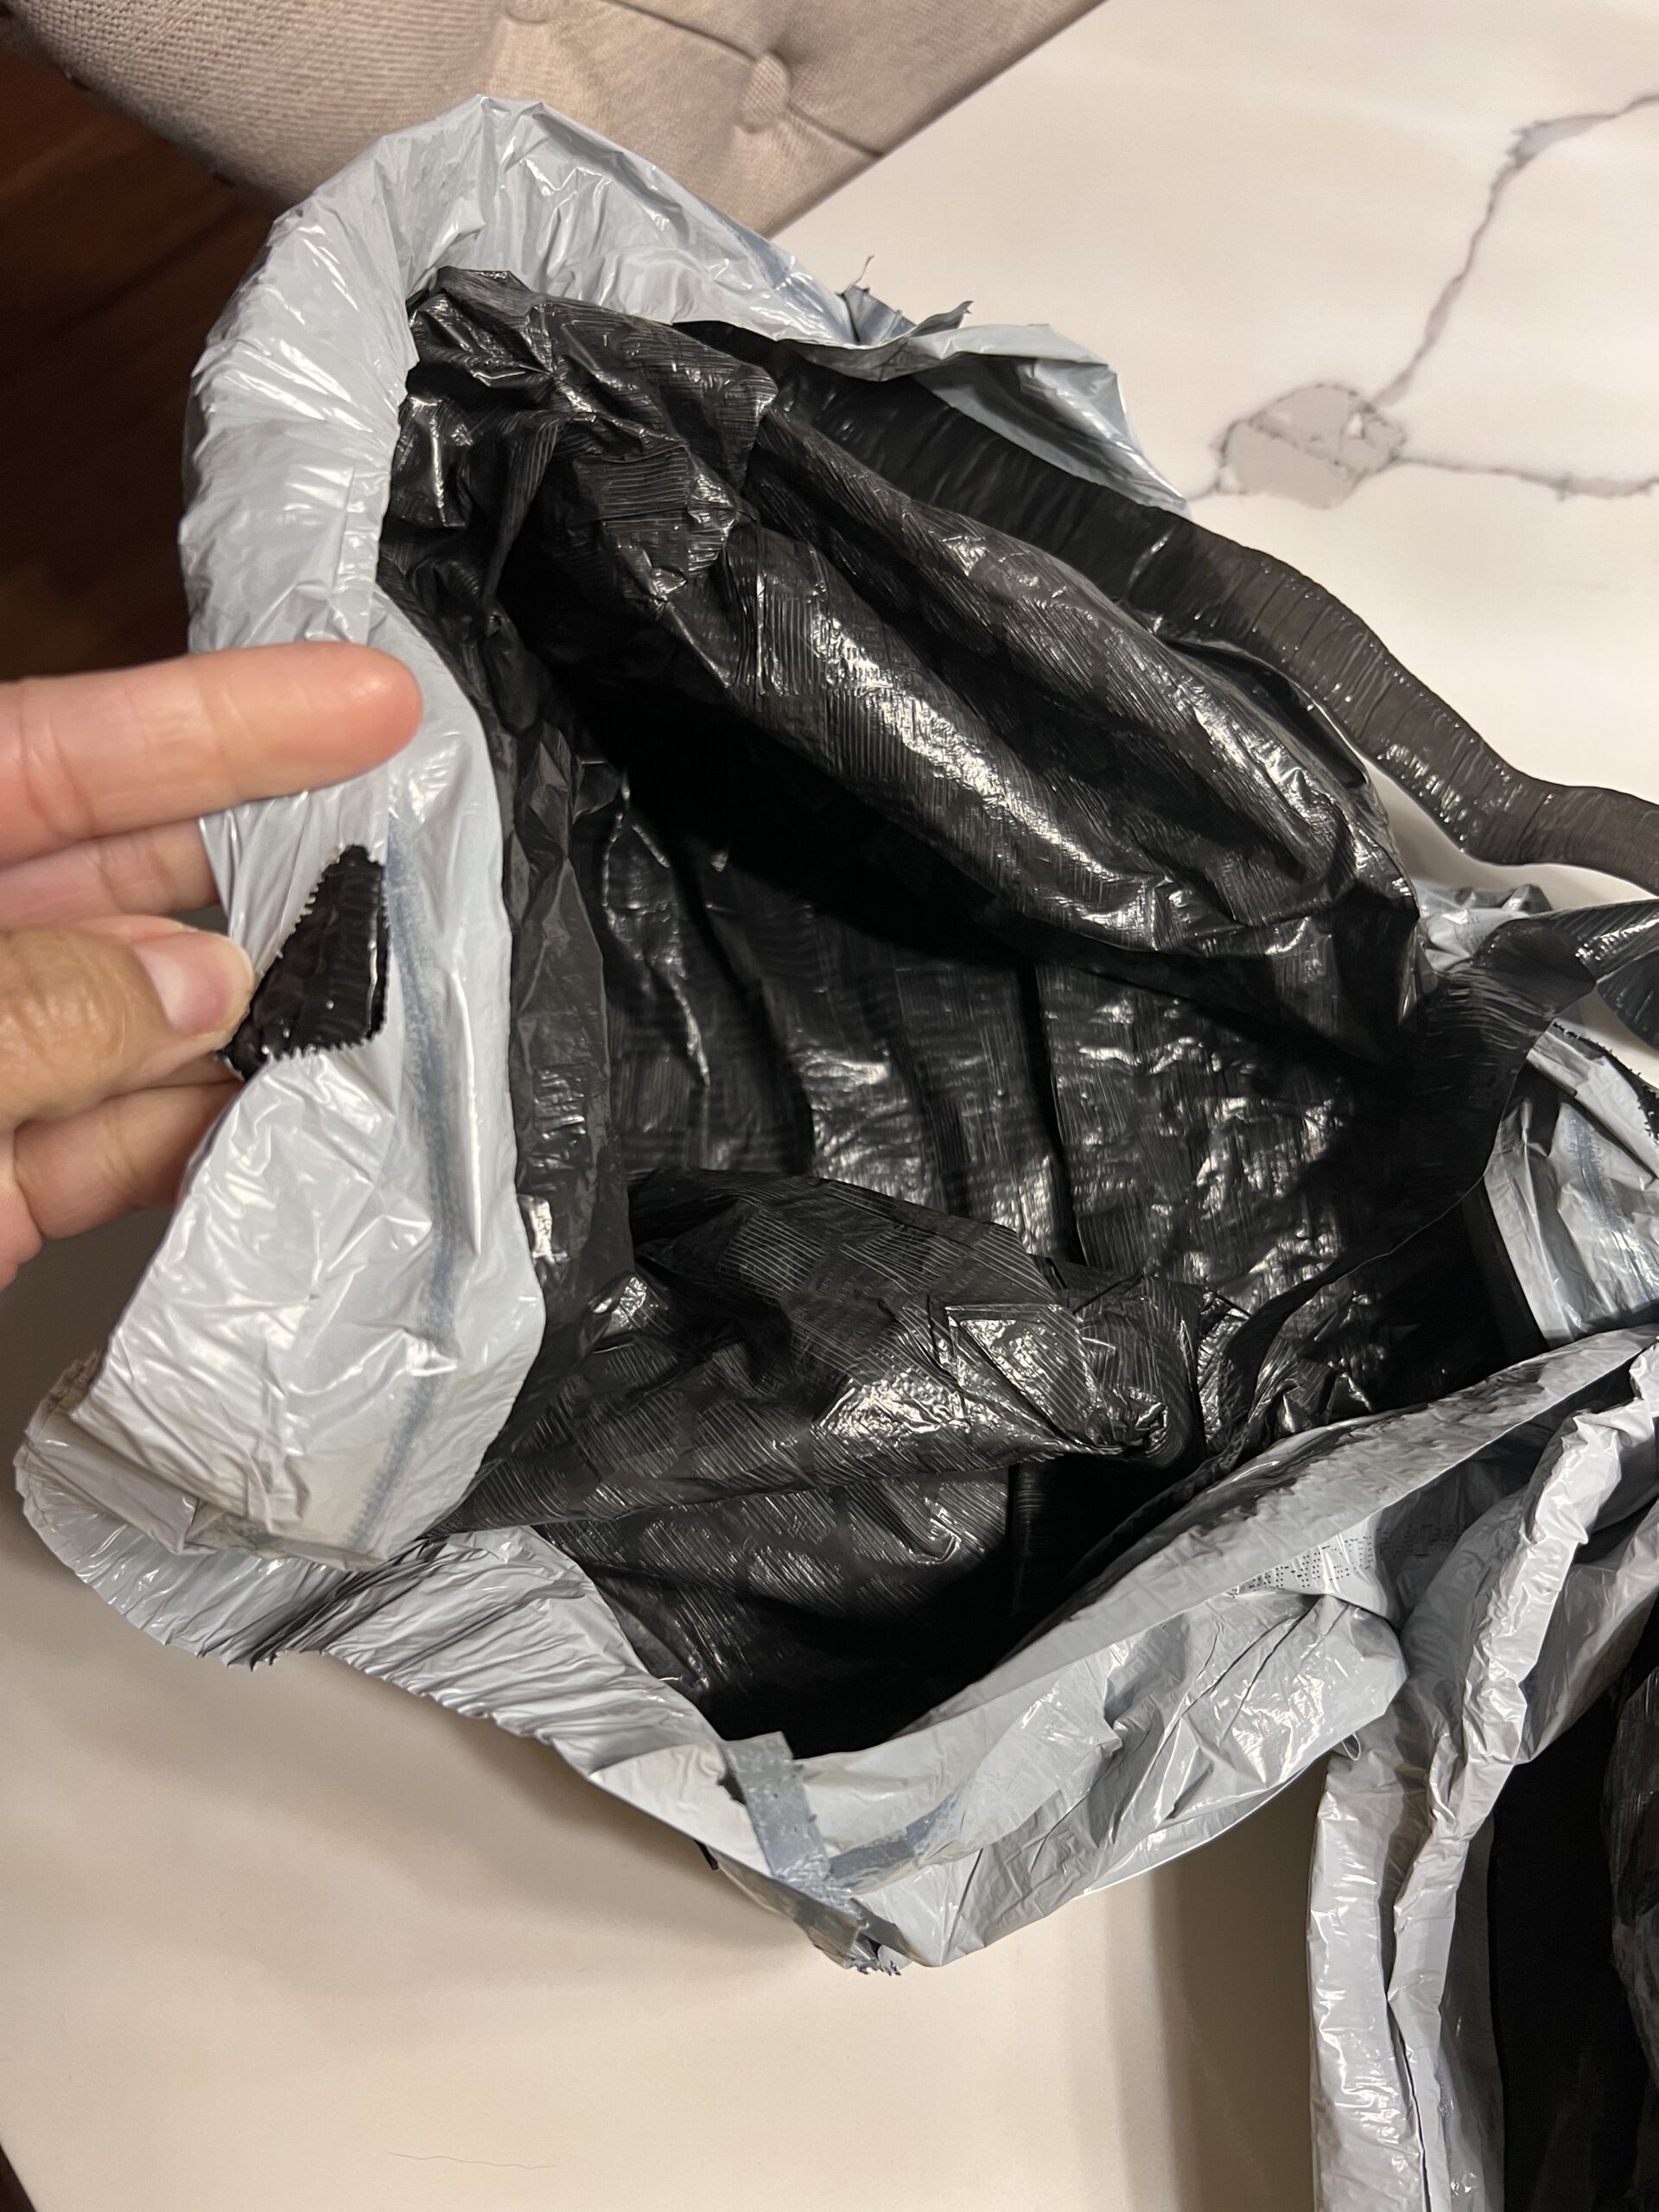 The Glad Products Company complaint Defective Glad bags